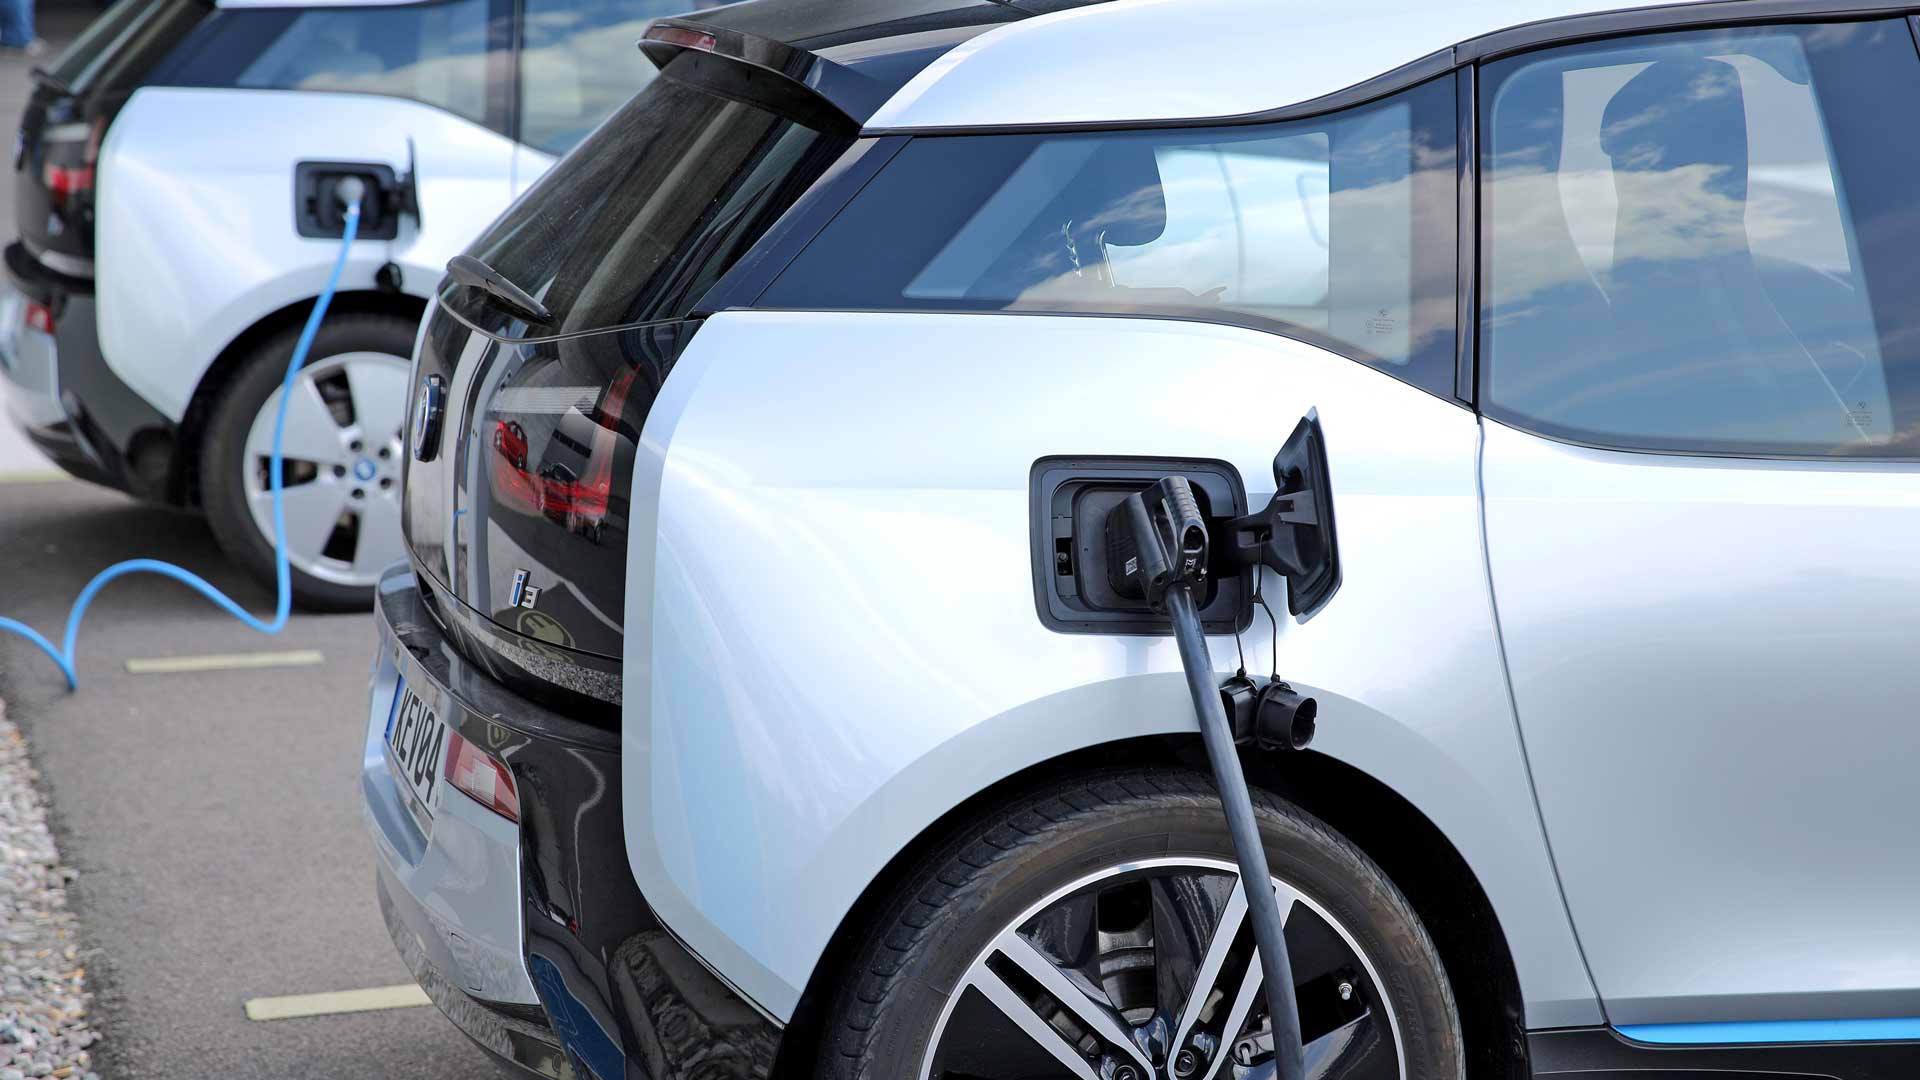 EV parked with charger connected